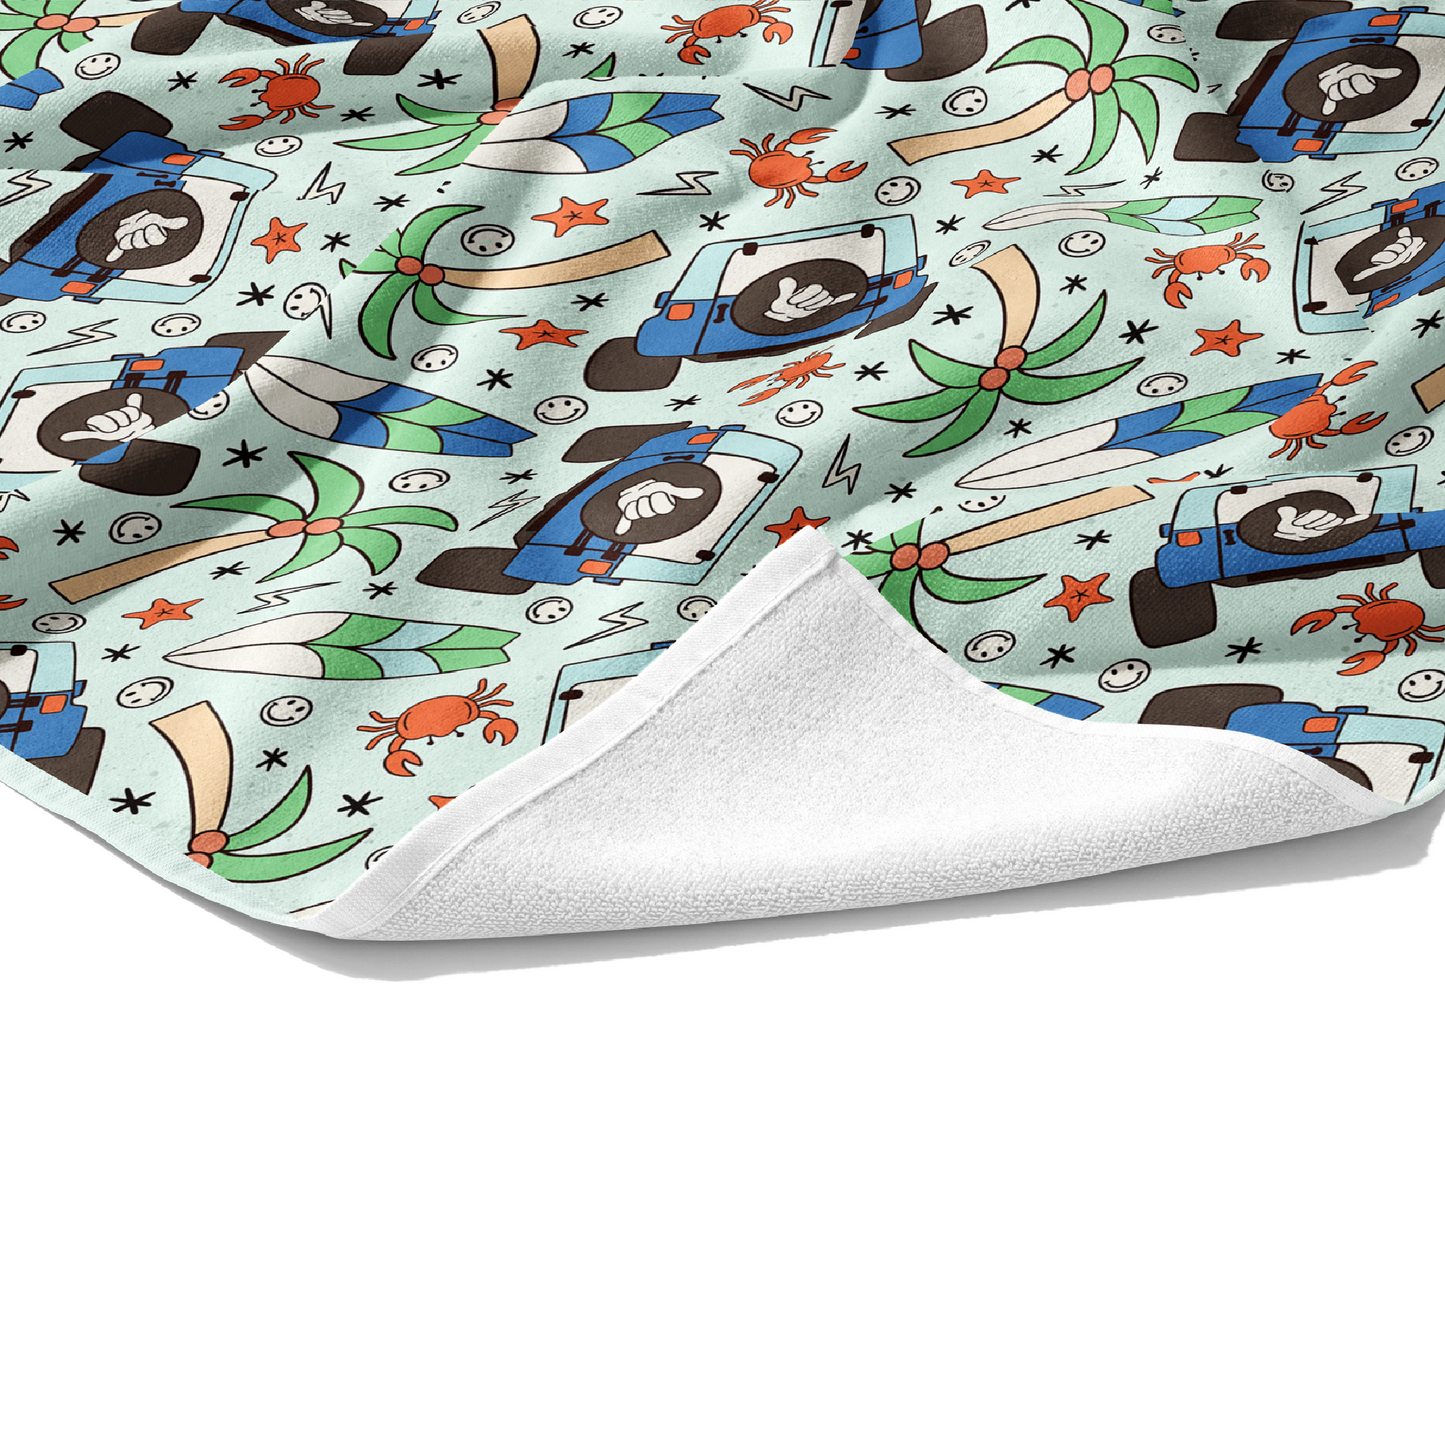 Plush white customizable cotton towel with blue and green tropical and jeep car print on the front.